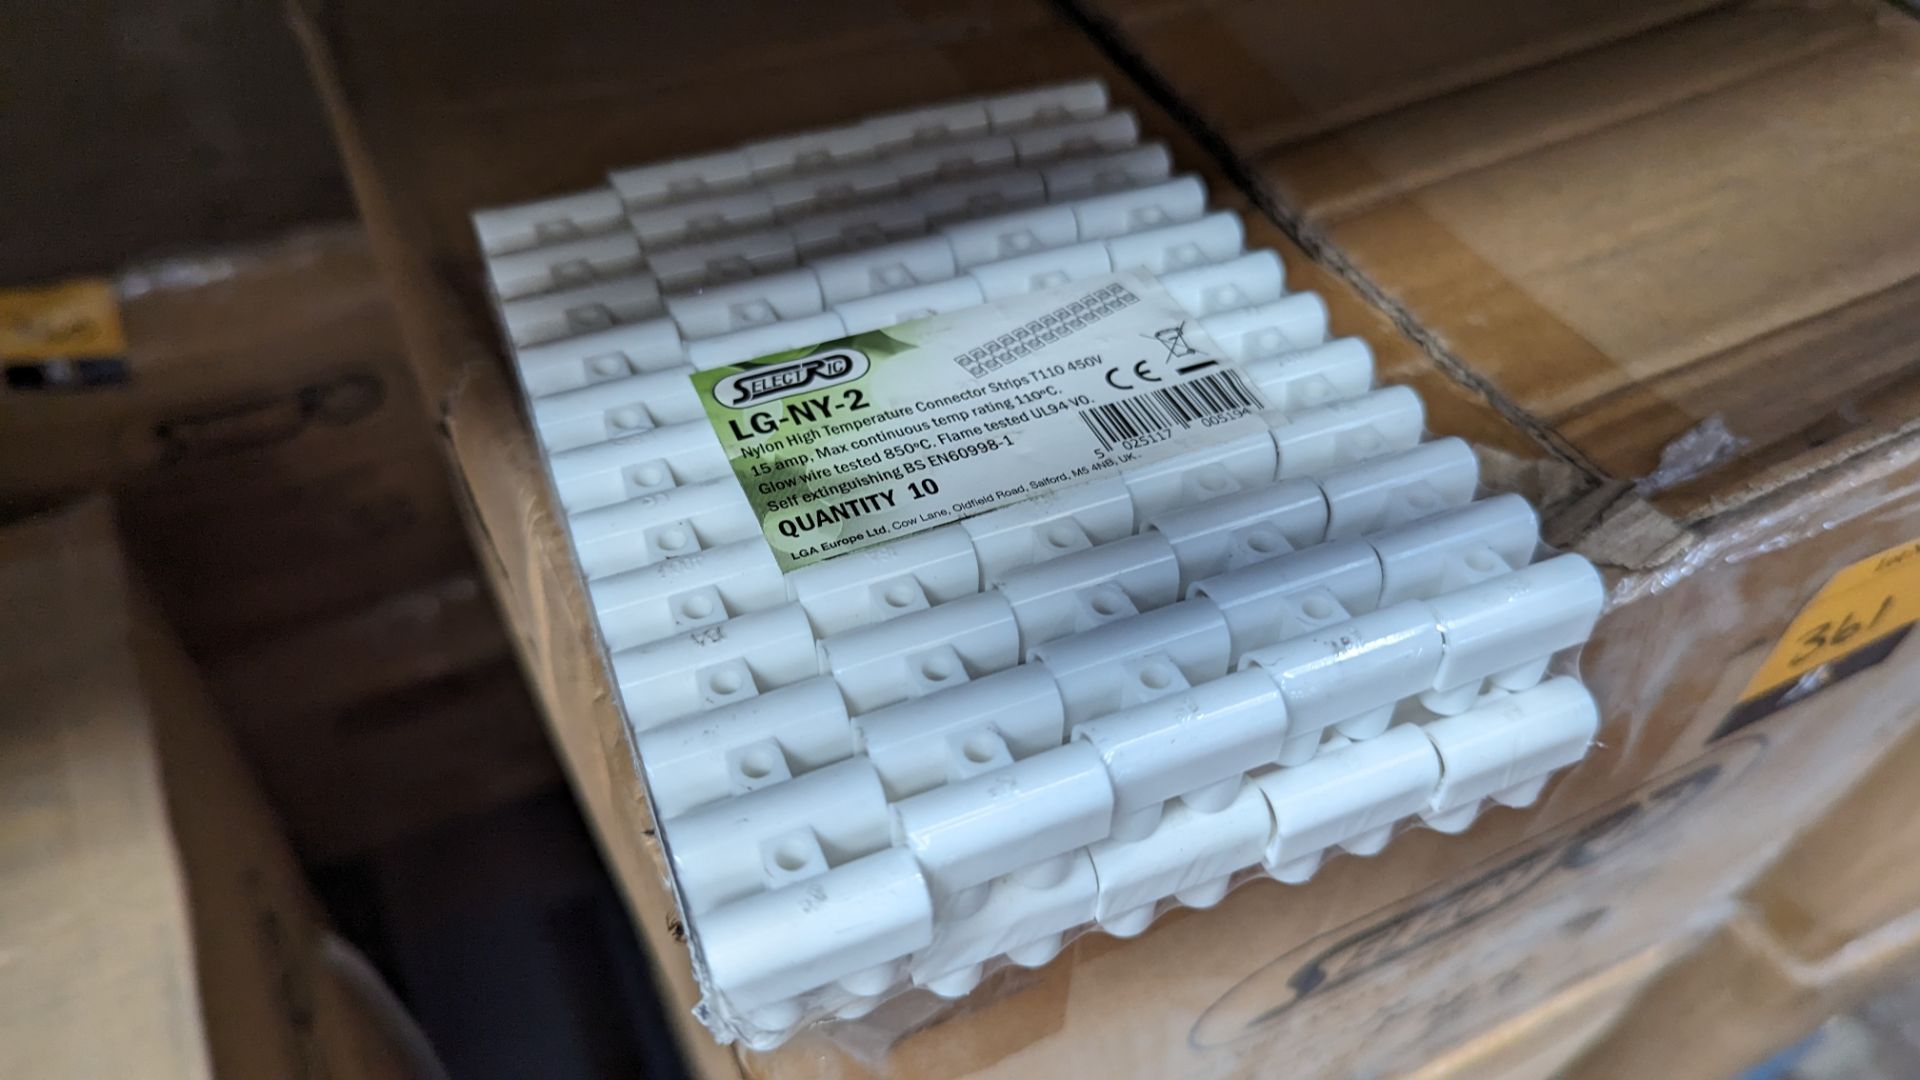 2 boxes (1,000 pieces total) of Selectric LG-NY-2 nylon high temperature connector strips, 15 amp - Image 4 of 5